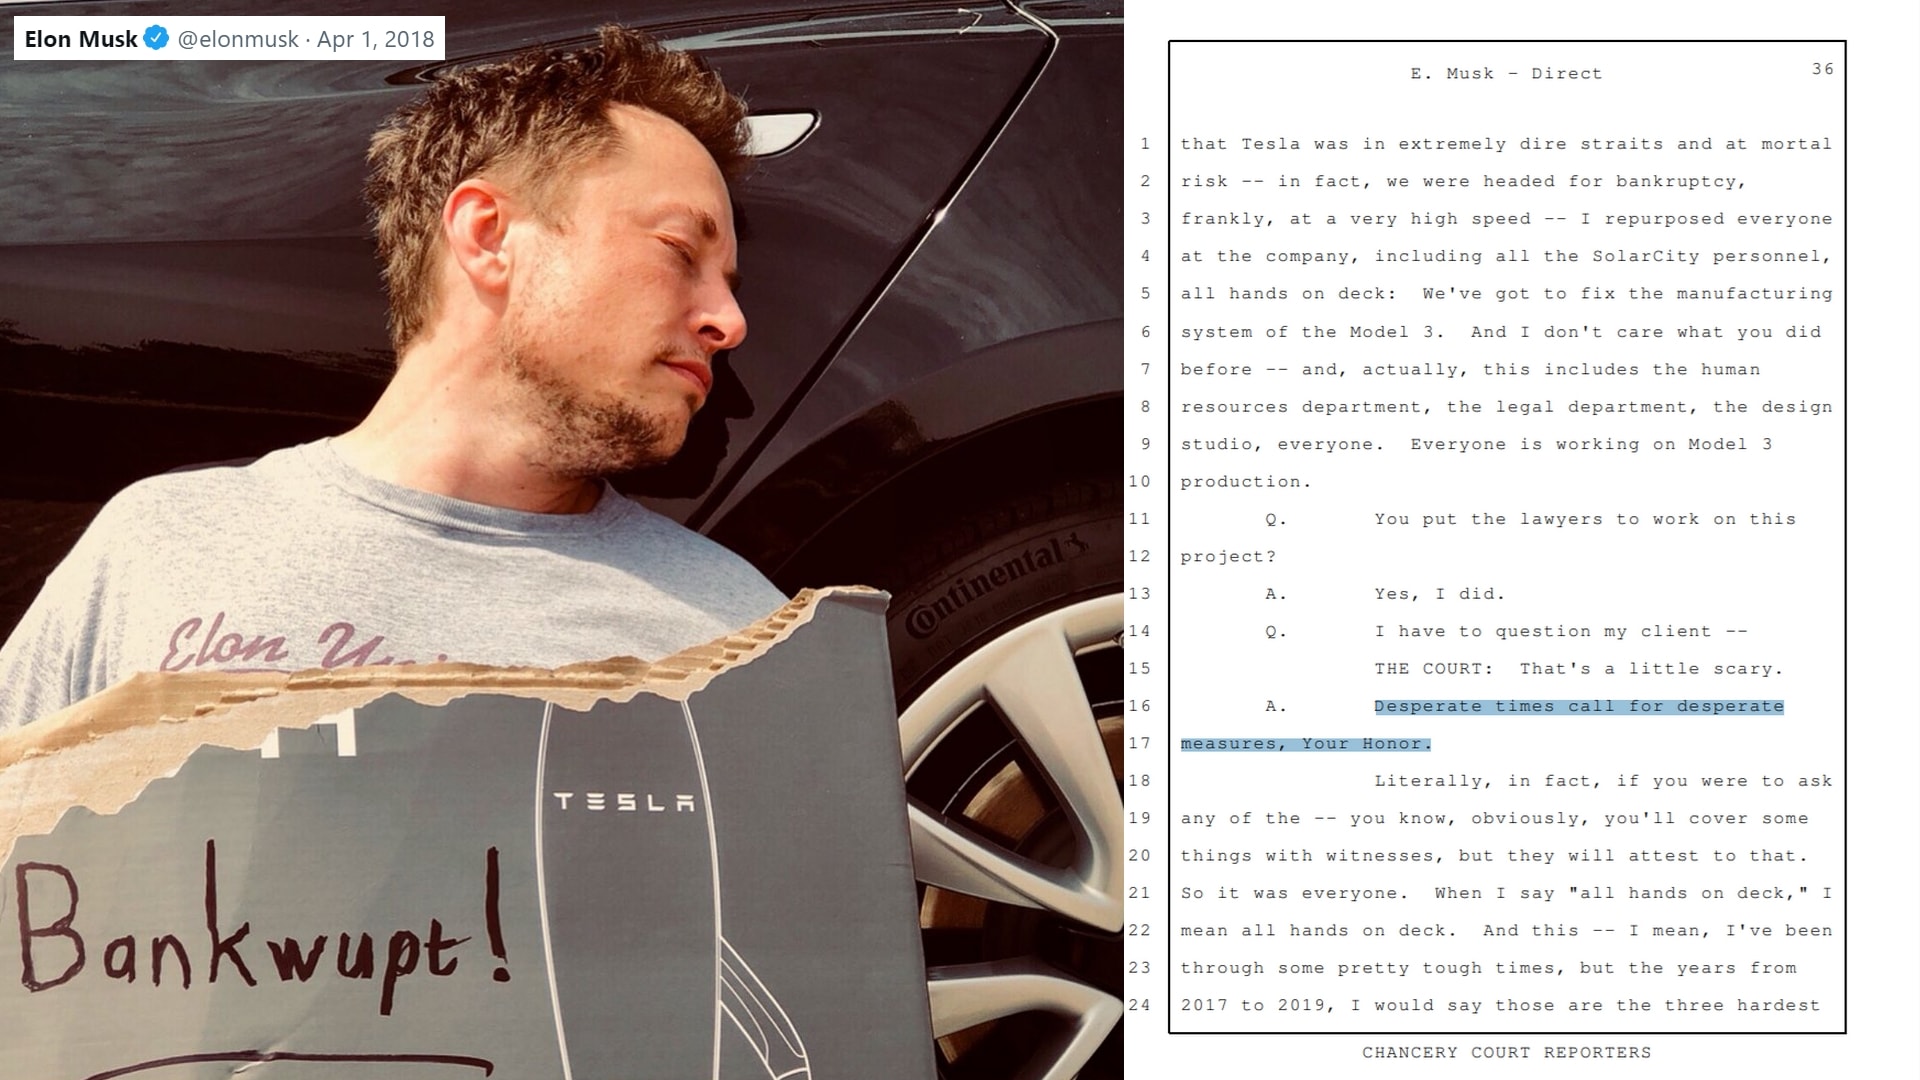 Elon Musk’s April Fool's Prank About Tesla Going Bankrupt Was a Real